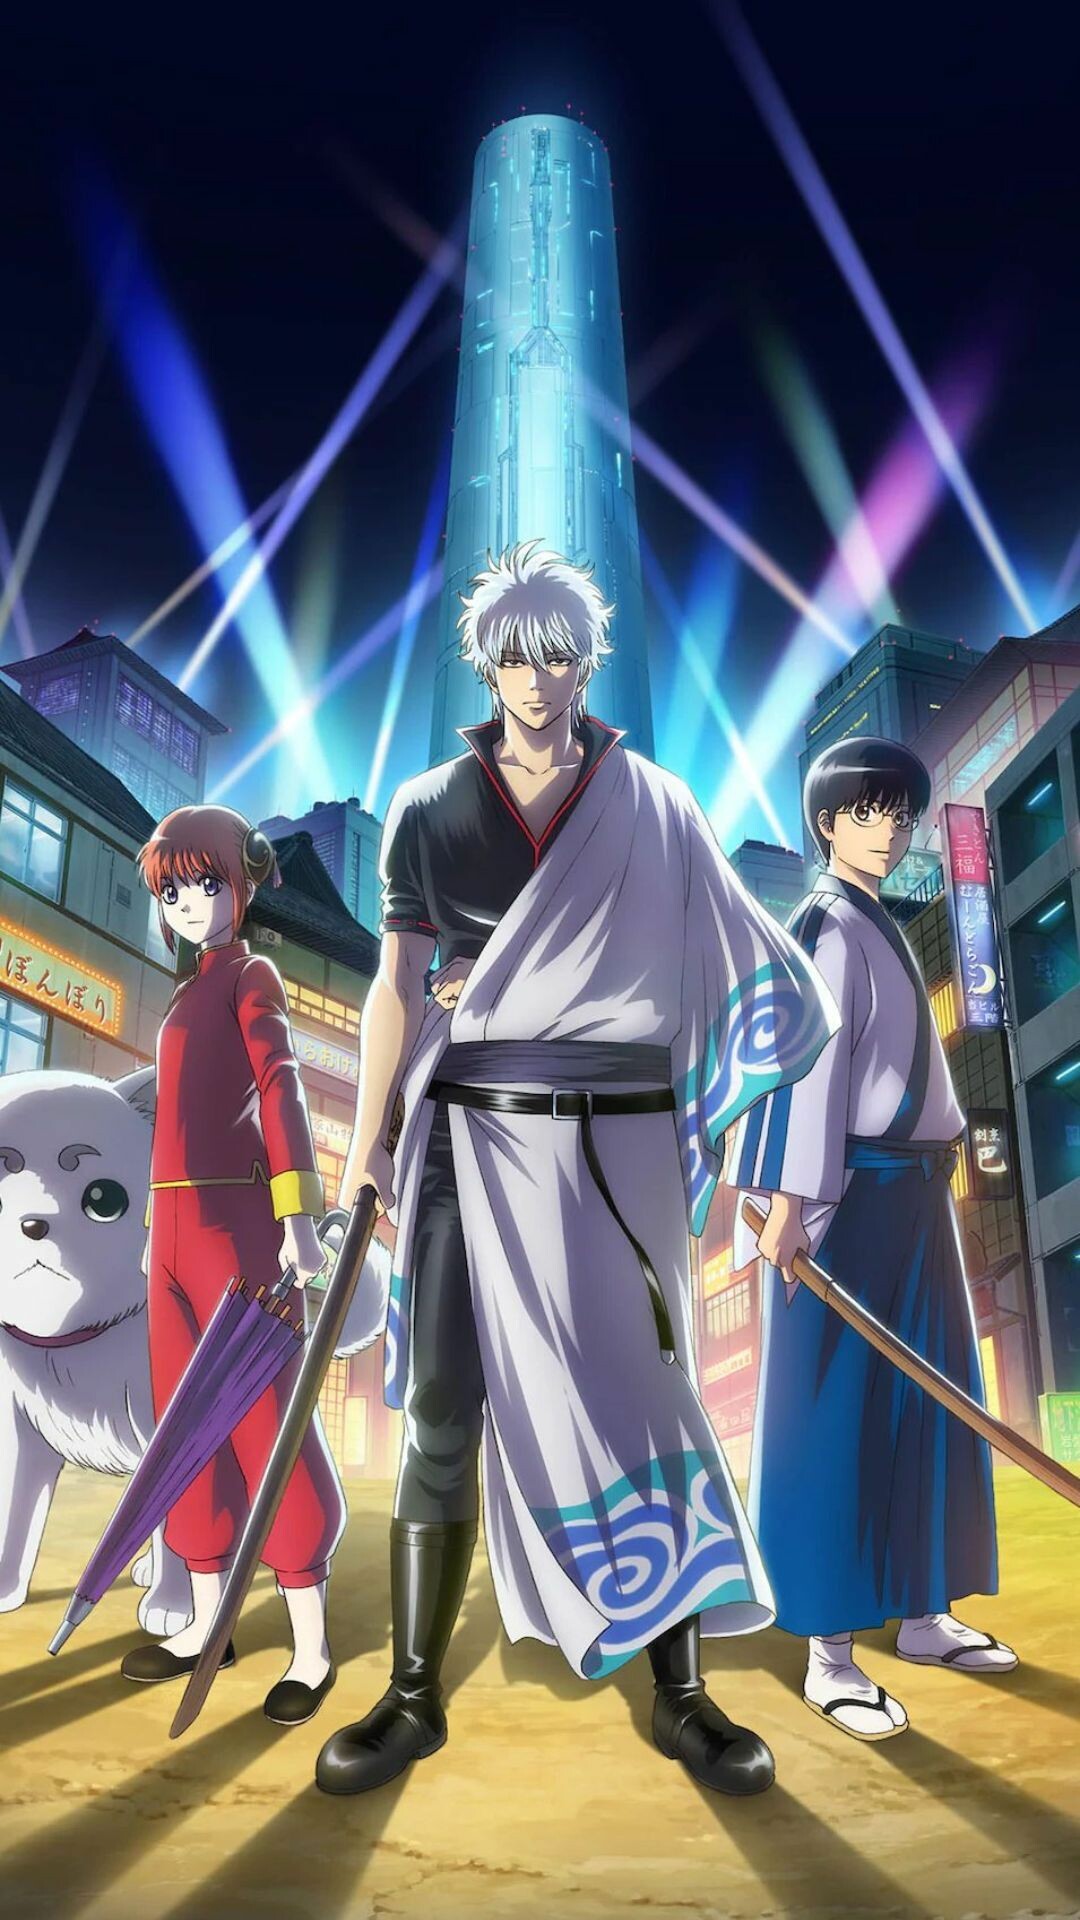 Gintama: The Final: A Japanese manga series written and illustrated by Hideaki Sorachi. 1080x1920 Full HD Background.